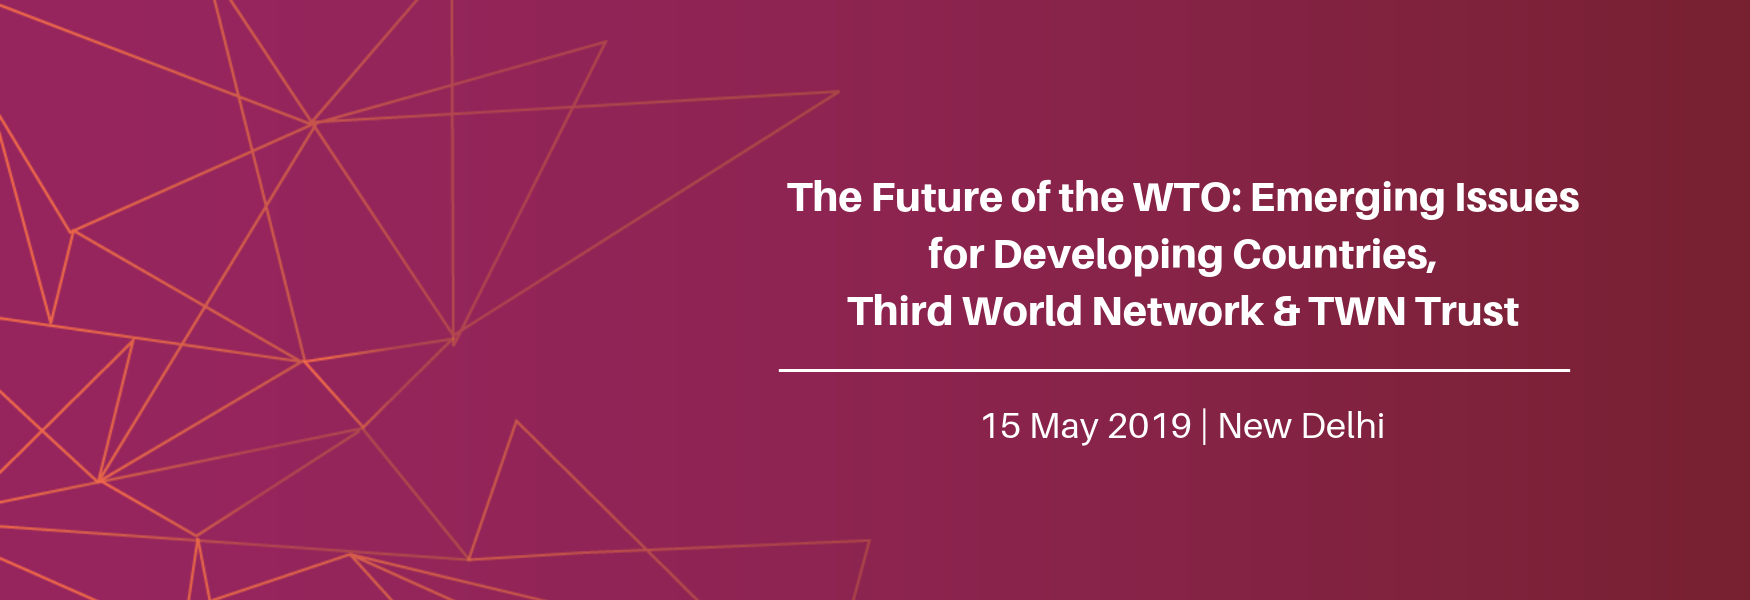 The Future of the WTO: Emerging Issues for Developing Countries 2019